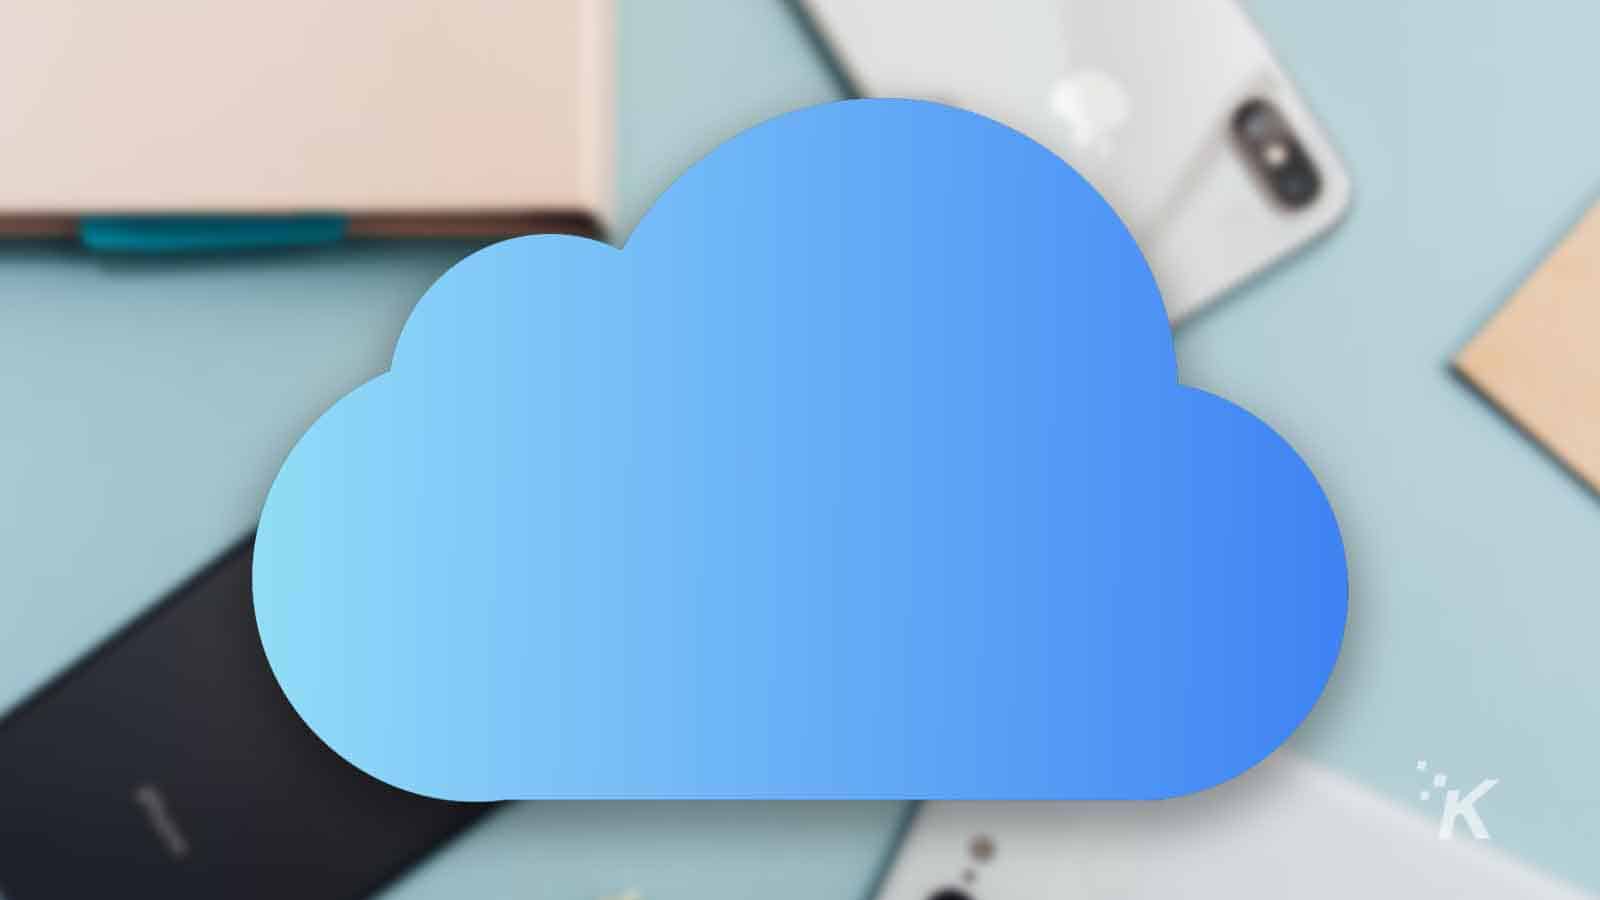 icloud logo with blurred background